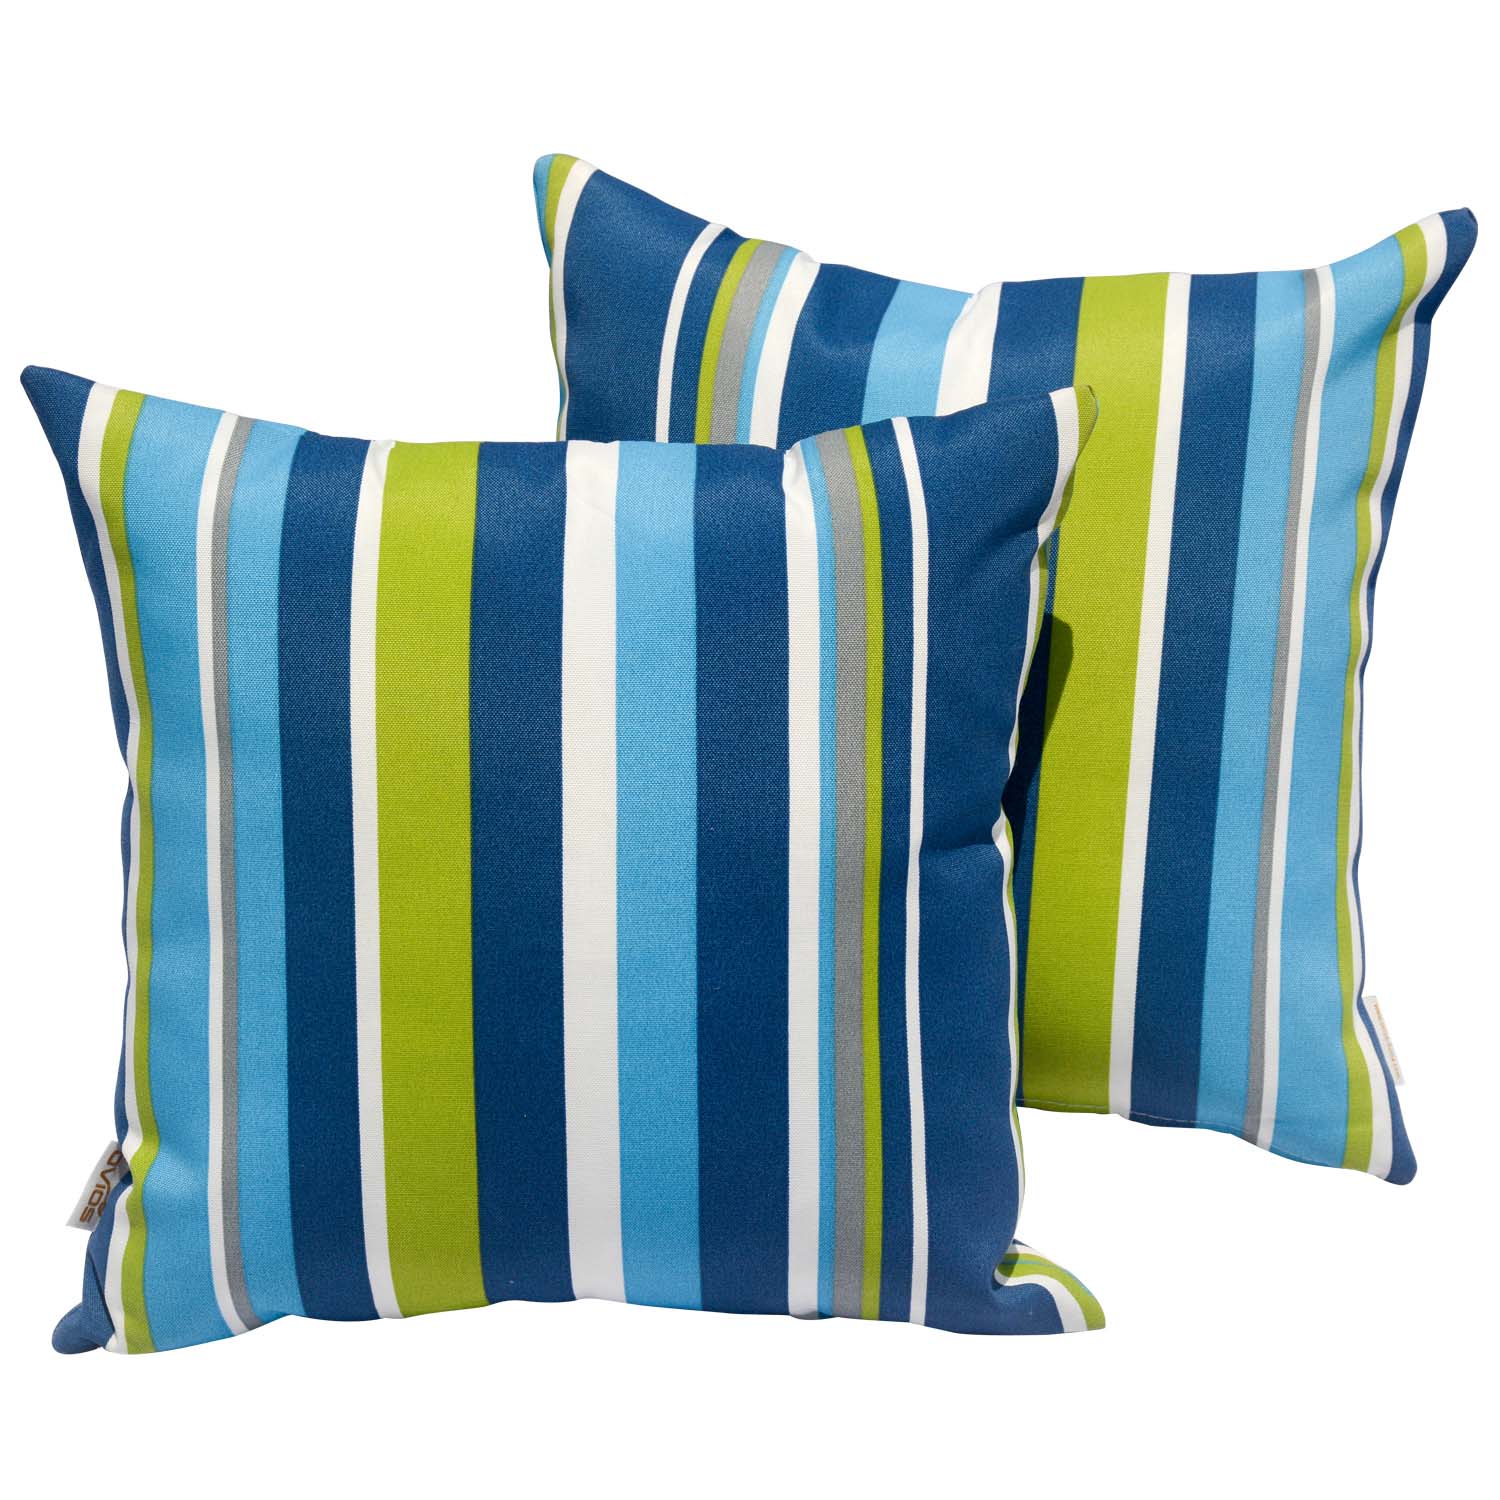 replacement cushions for patio furniture